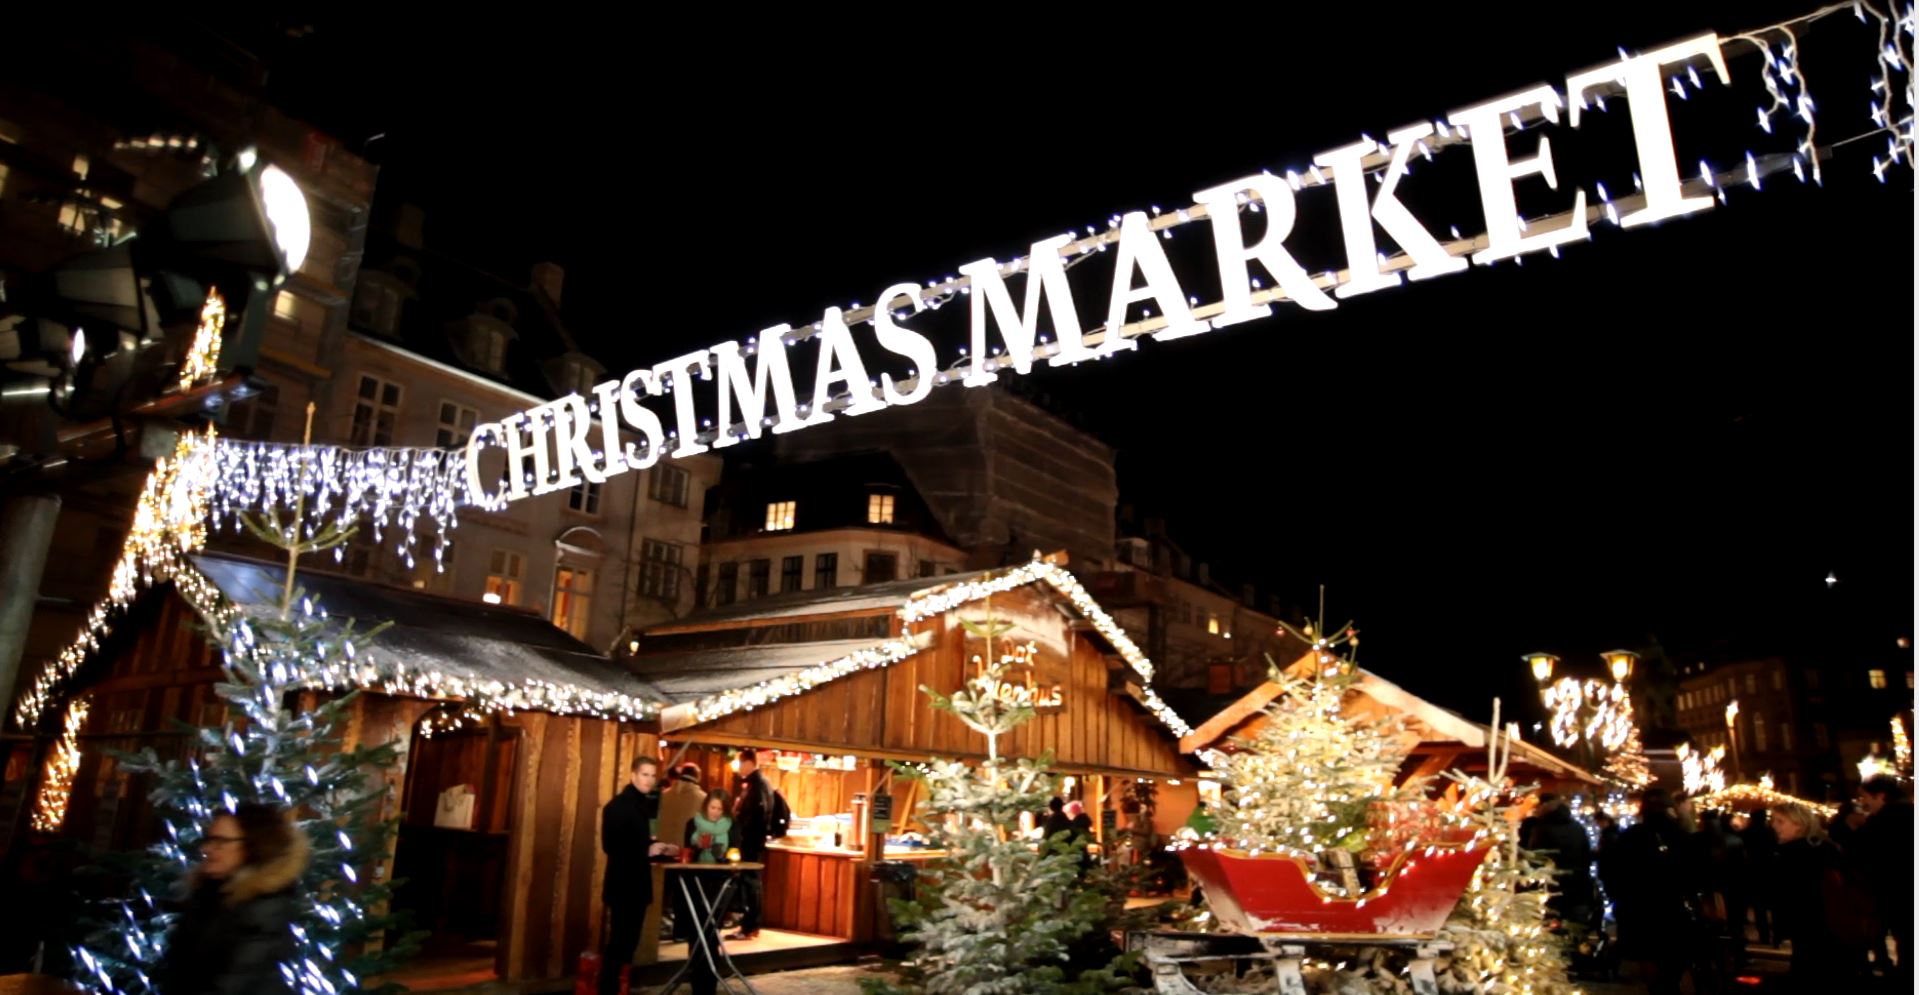 Nice Images Collection: Christmas Market Desktop Wallpapers